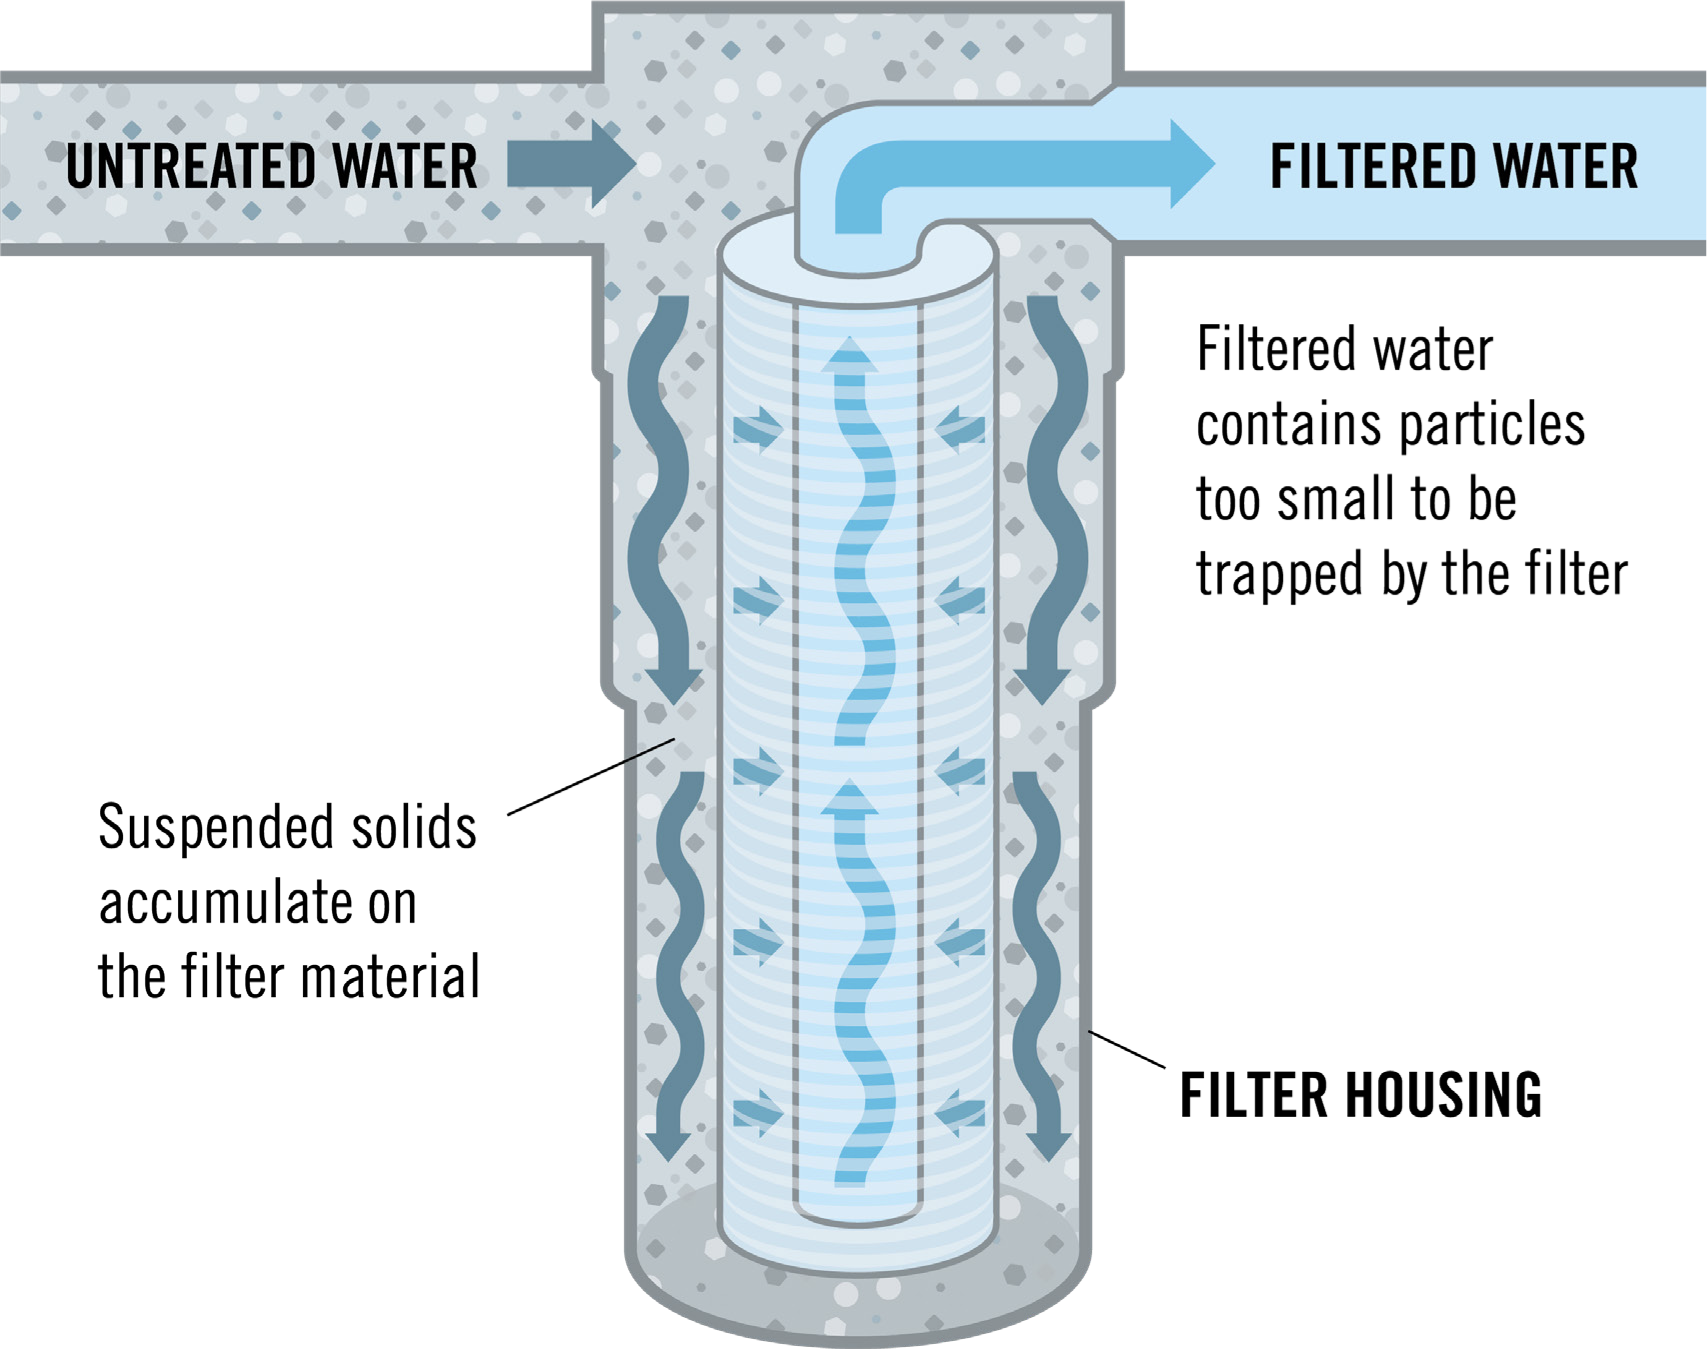 Disgram of the sediment filtration process